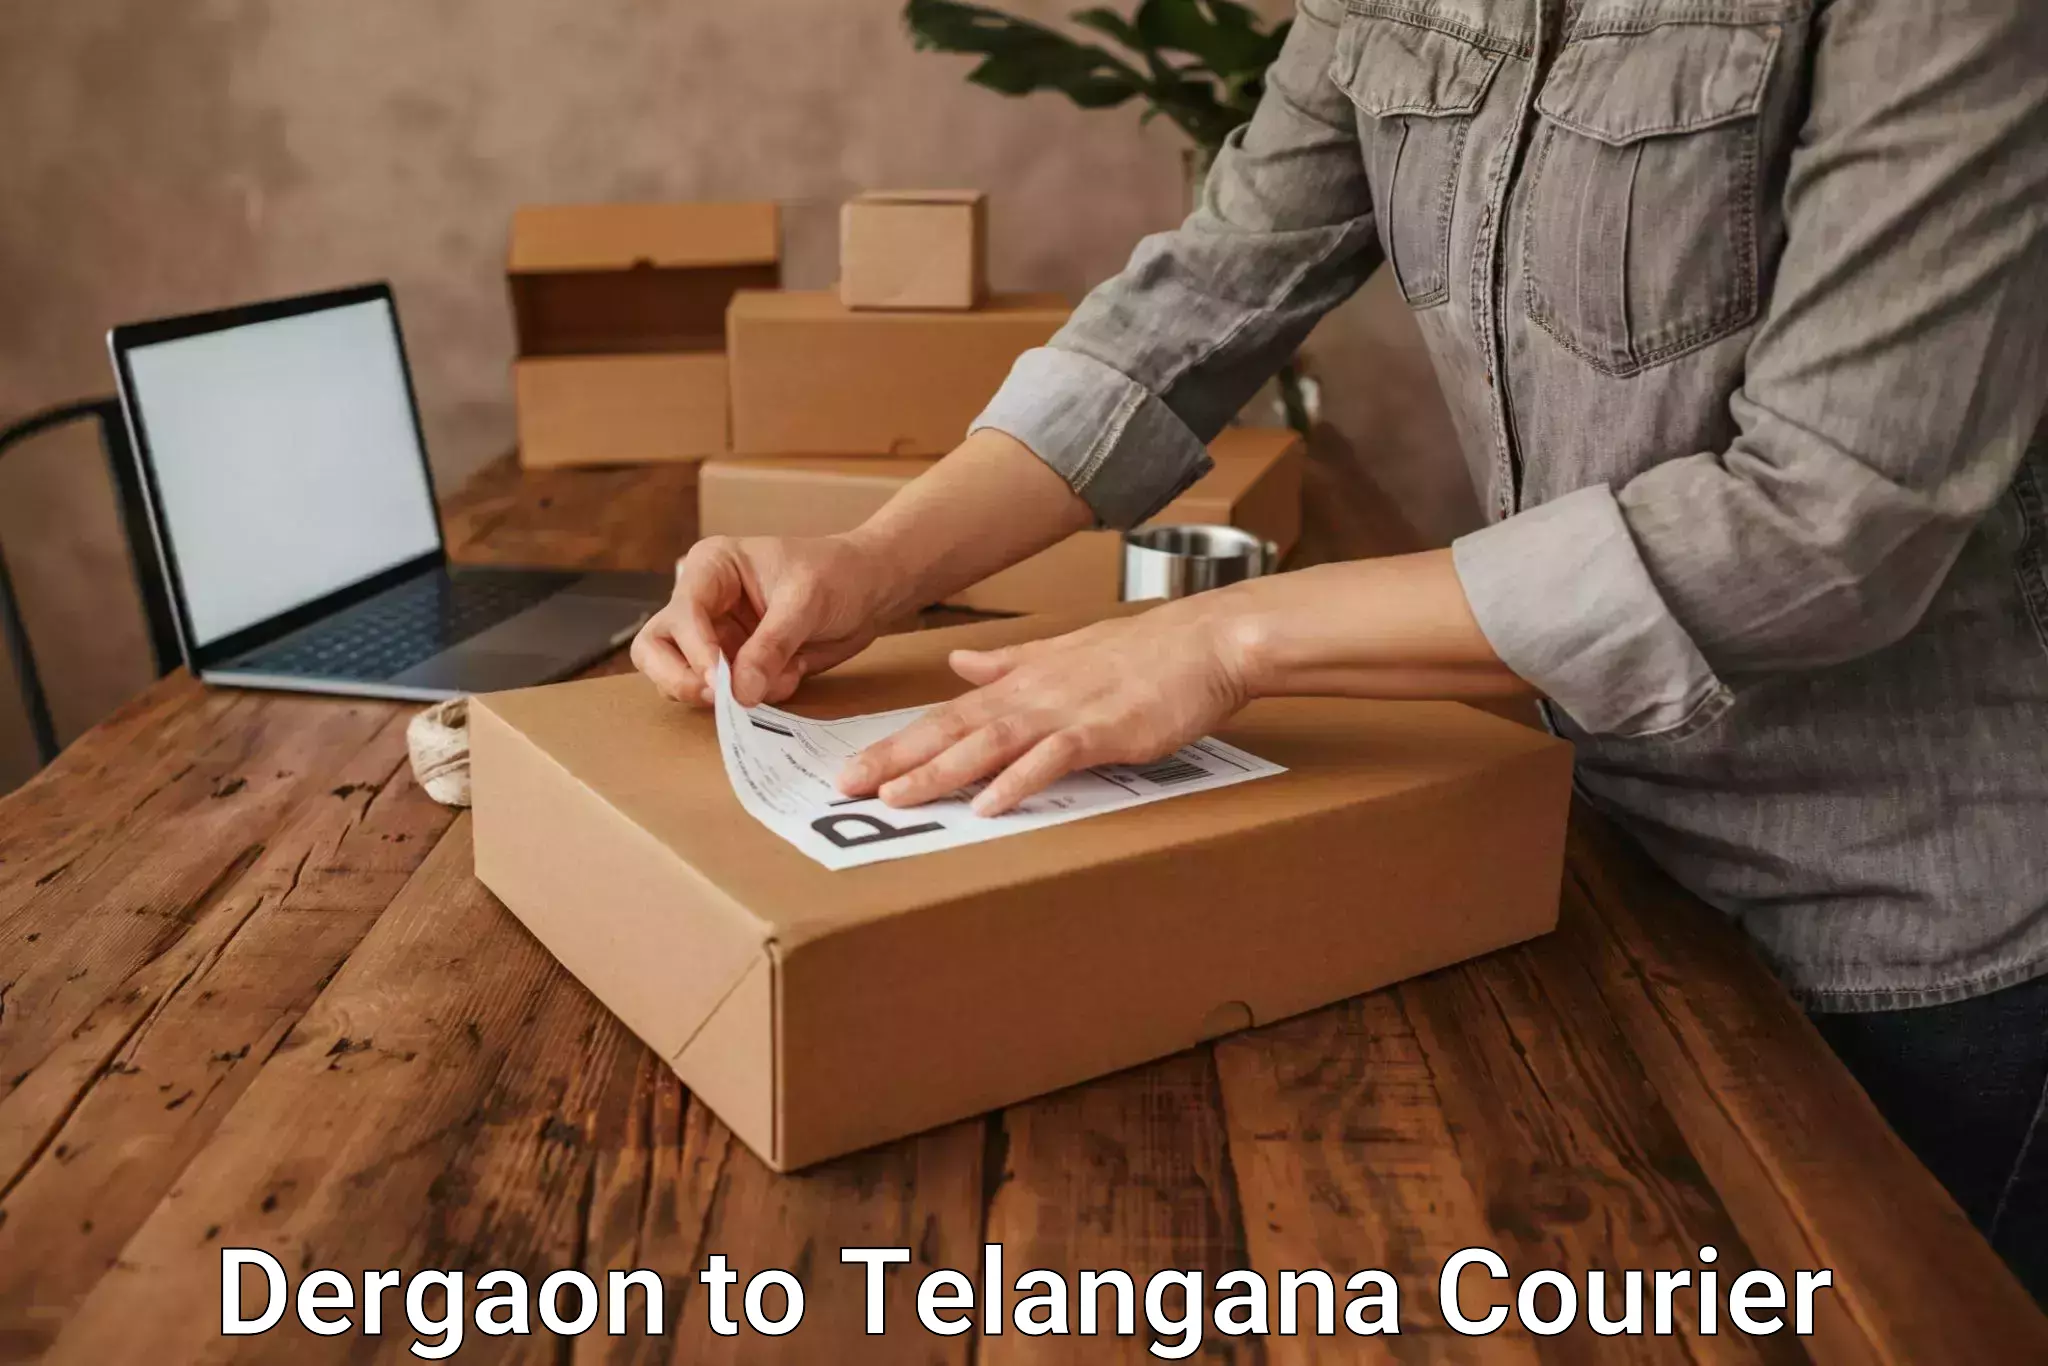 Reliable parcel services in Dergaon to Kodad